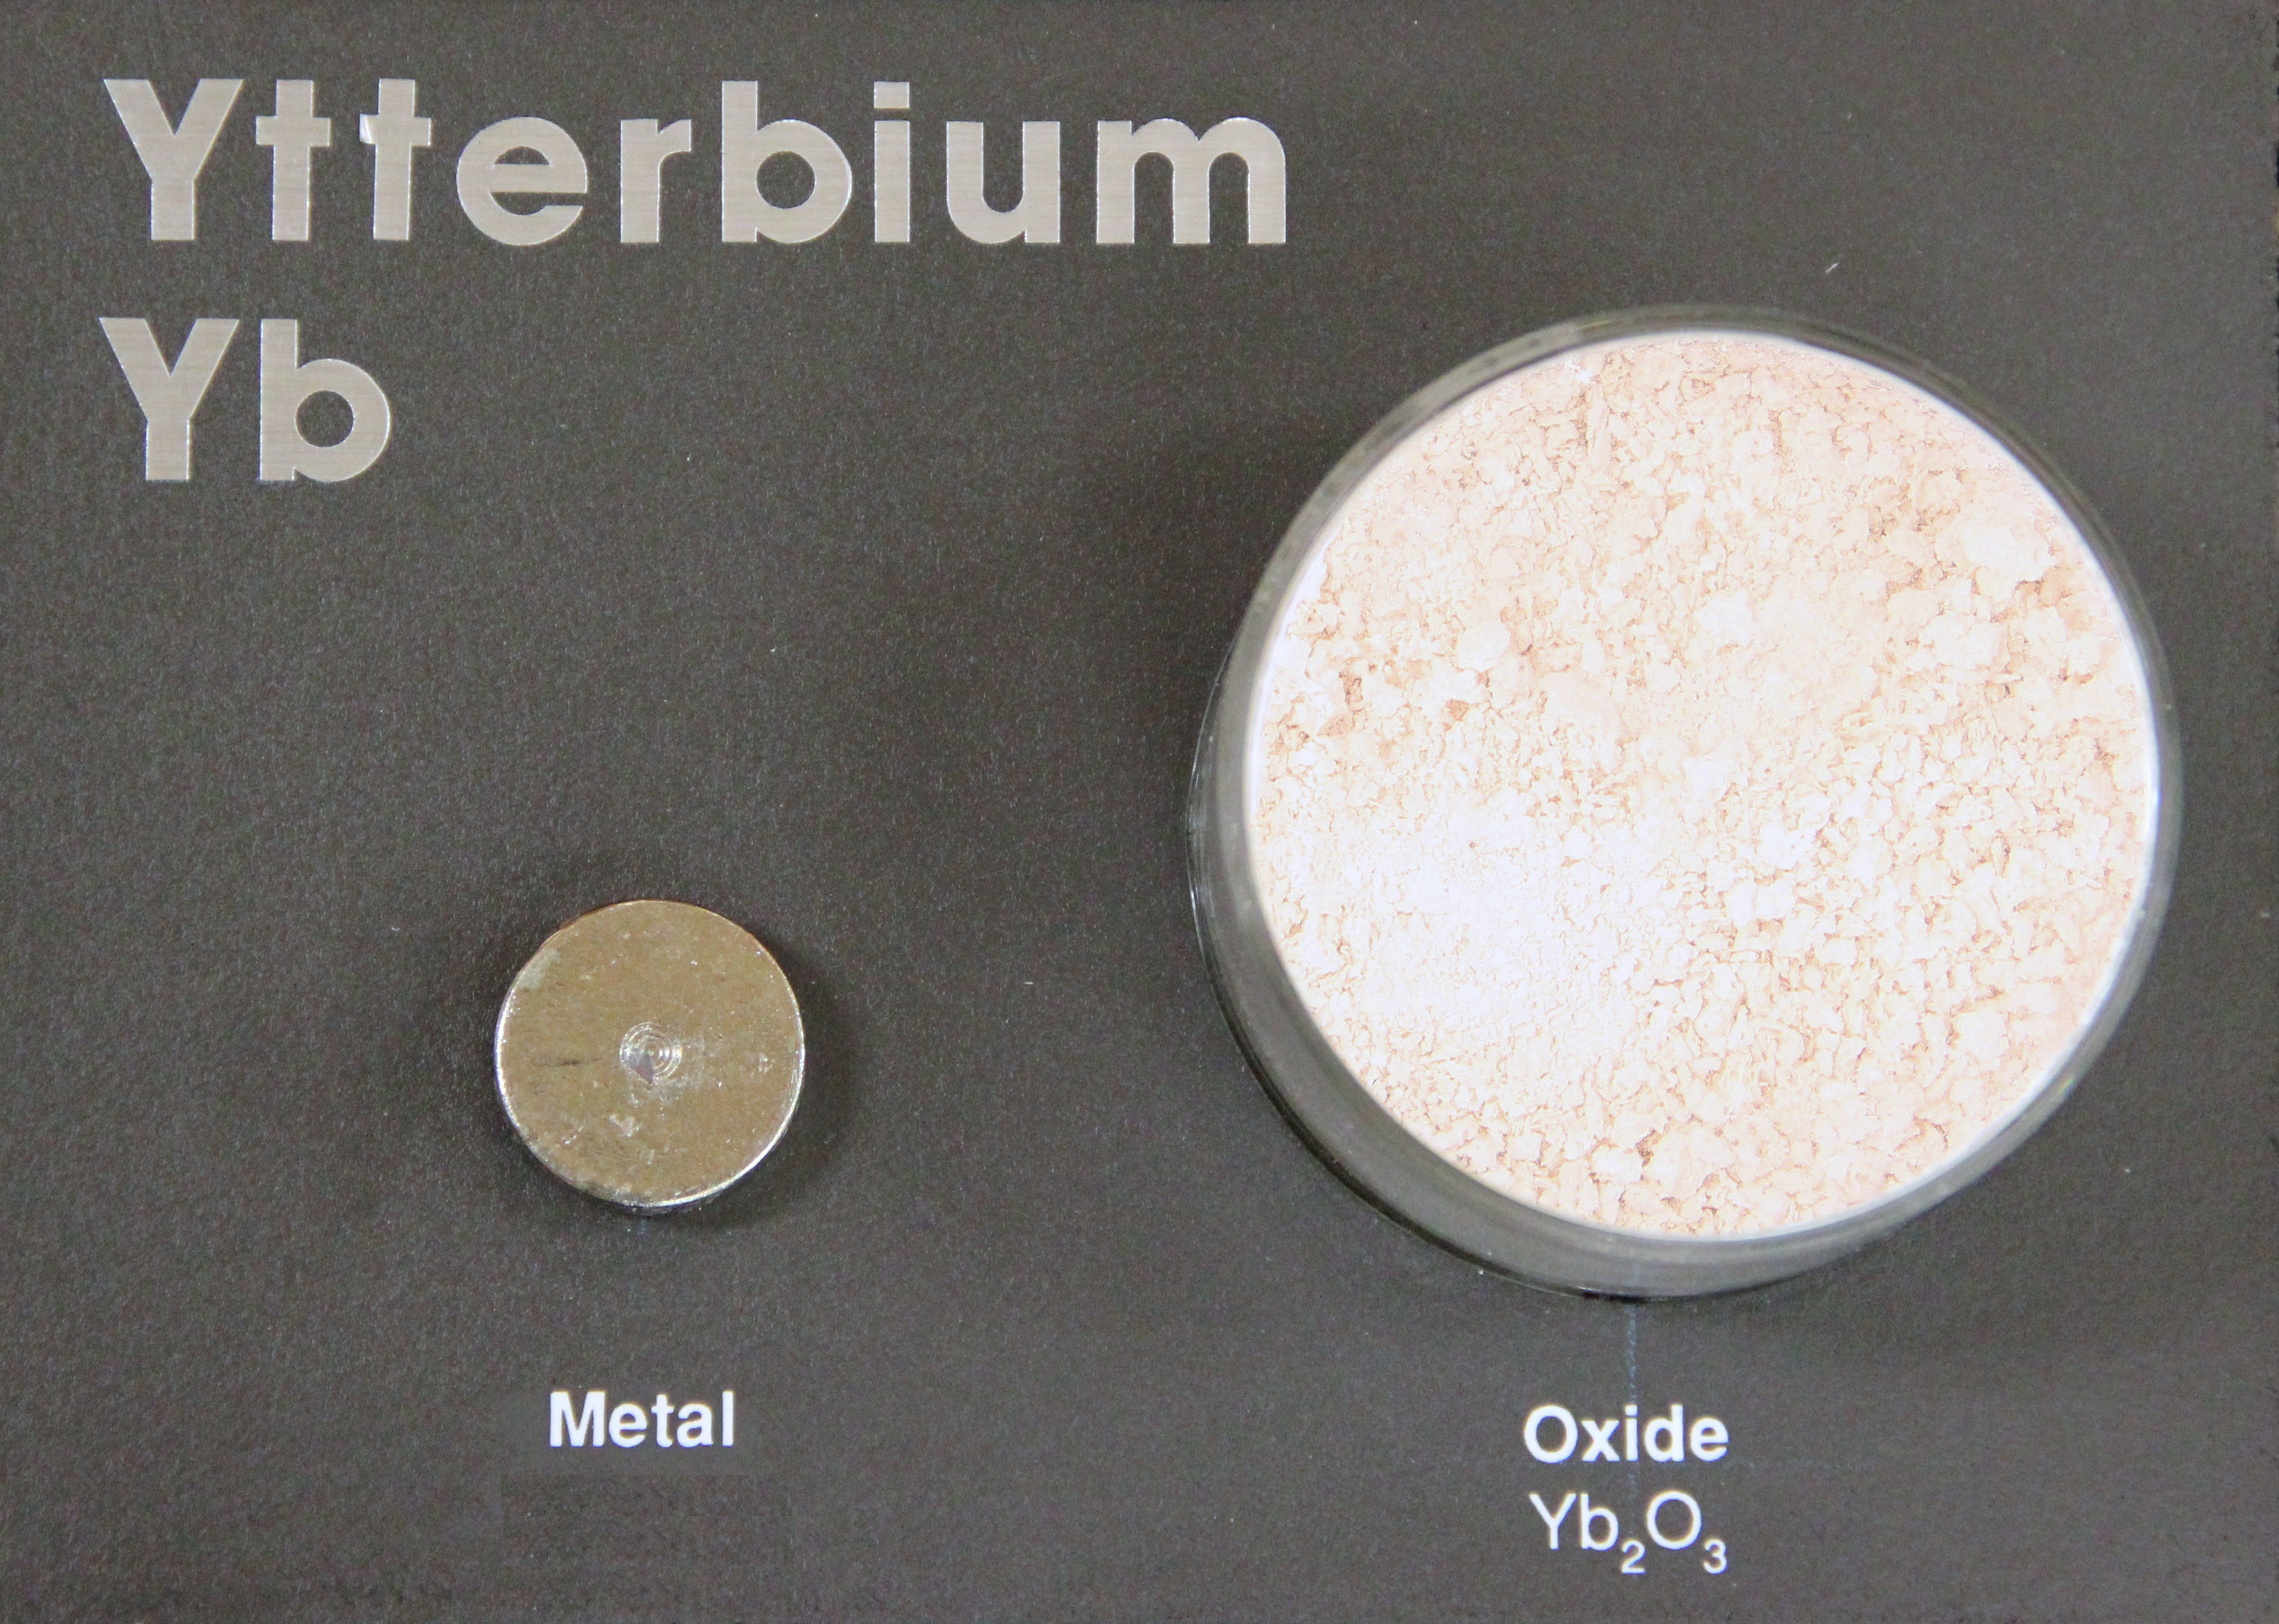 Ytterbium metal and oxide